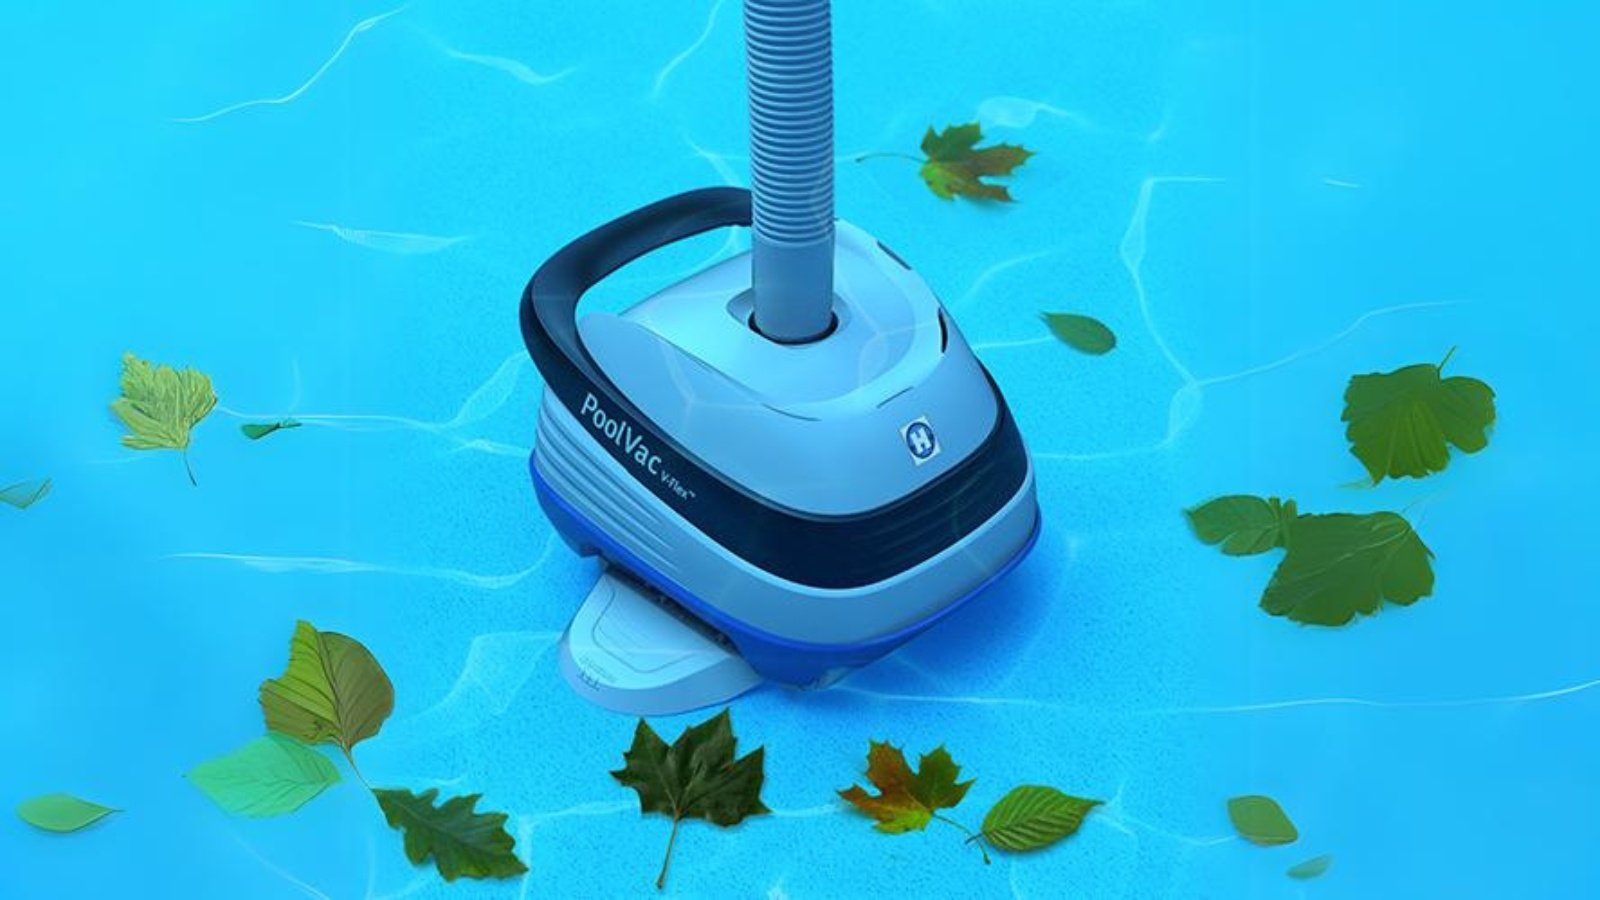 Suction vs Robotic: Choosing the Right Pool Cleaner